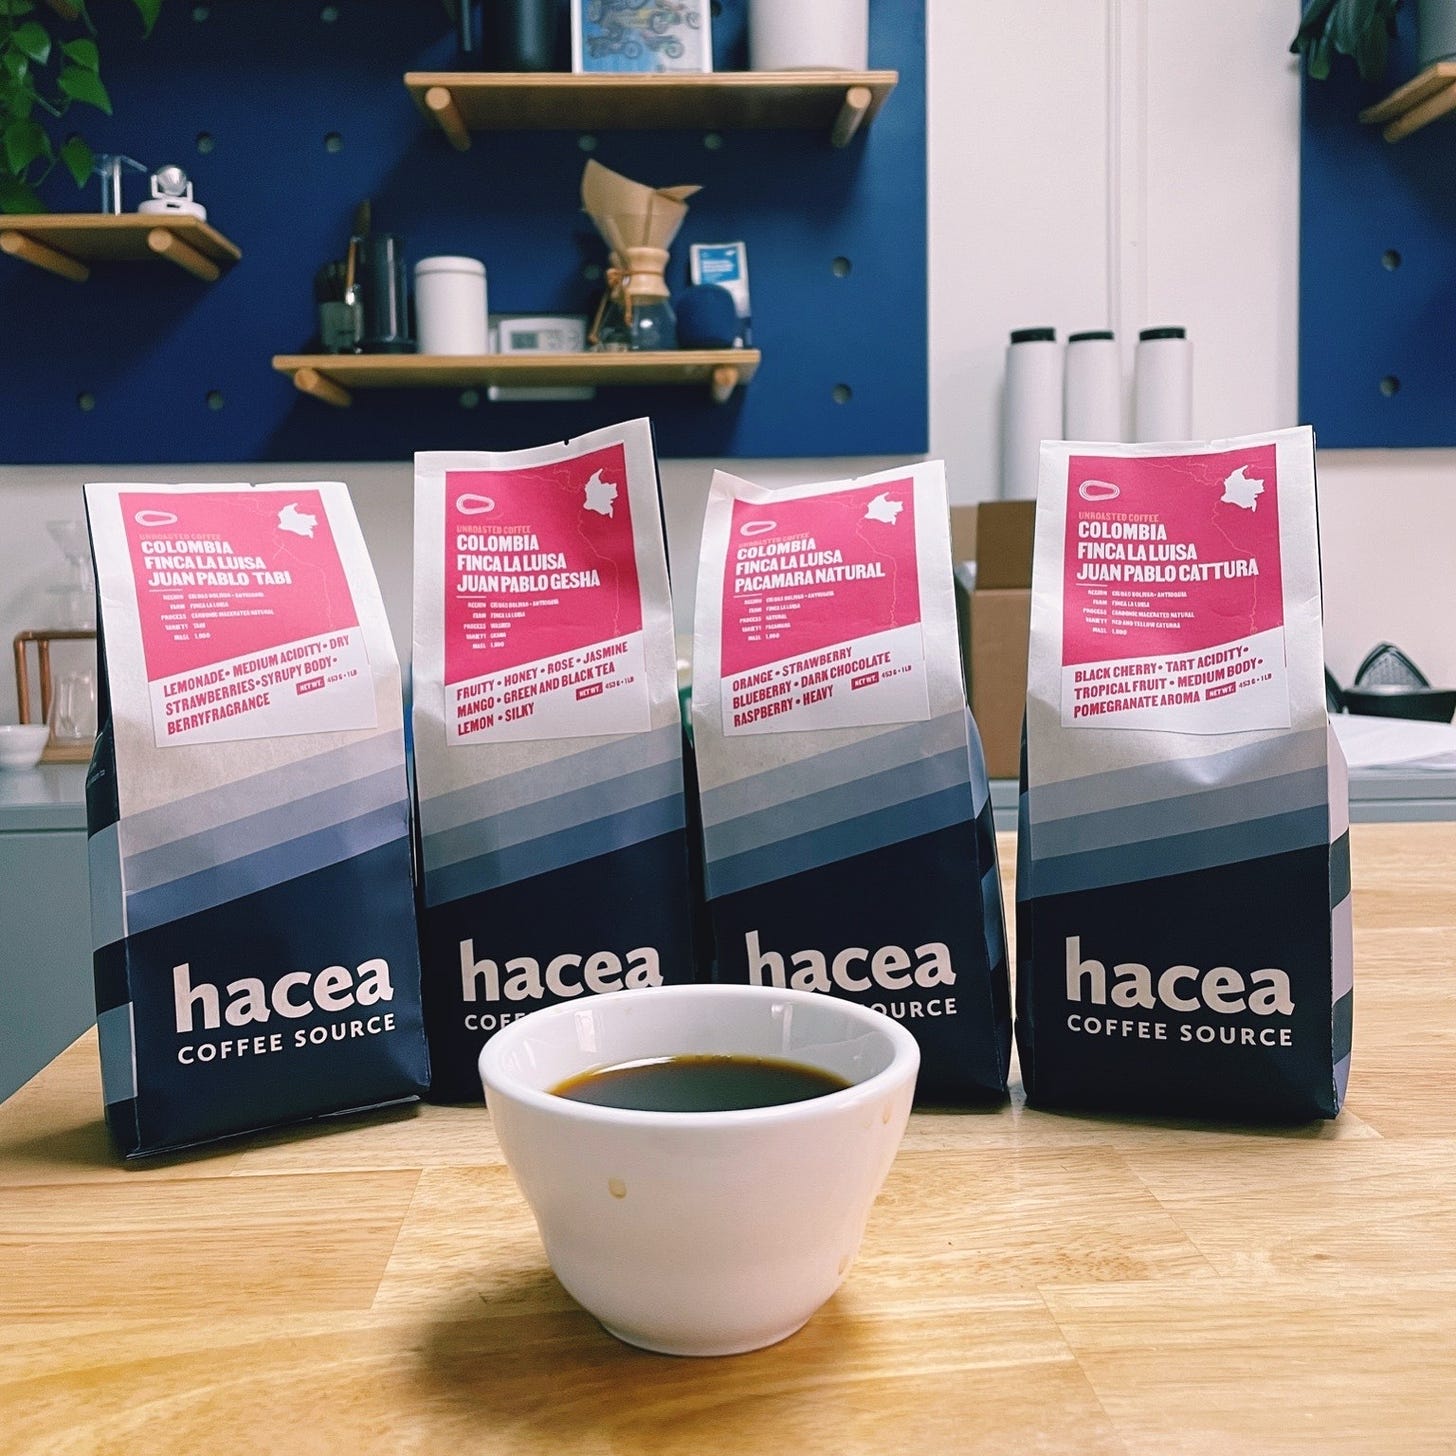 Four blue and white coffee bags with red labels at the top showcase Colombia coffees from Hacea Coffee Source. A coffee in a white cupping bowl sits in front of the packages.